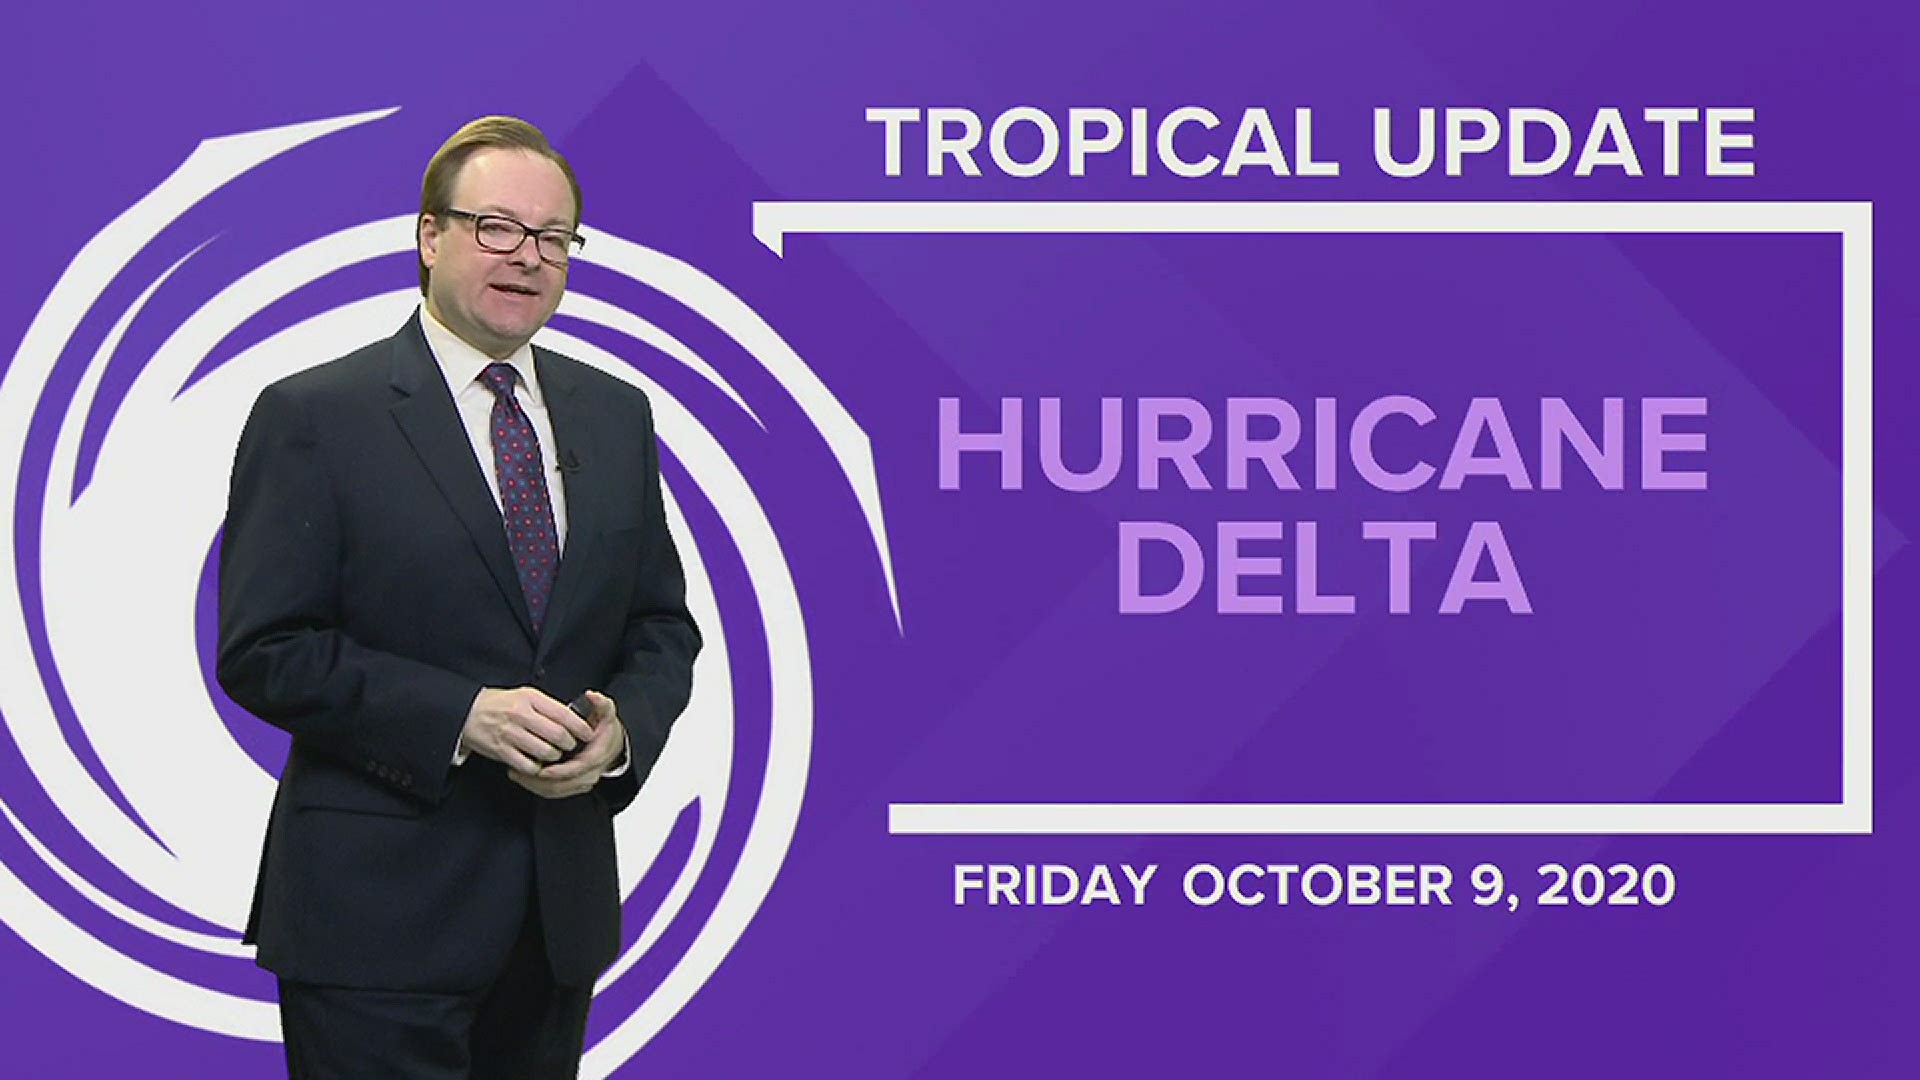 13News Now Meteorologist Evan Stewart has the latest tracks on Hurricane Delta which is expected to make landfall in Louisiana as a Category 2 storm.